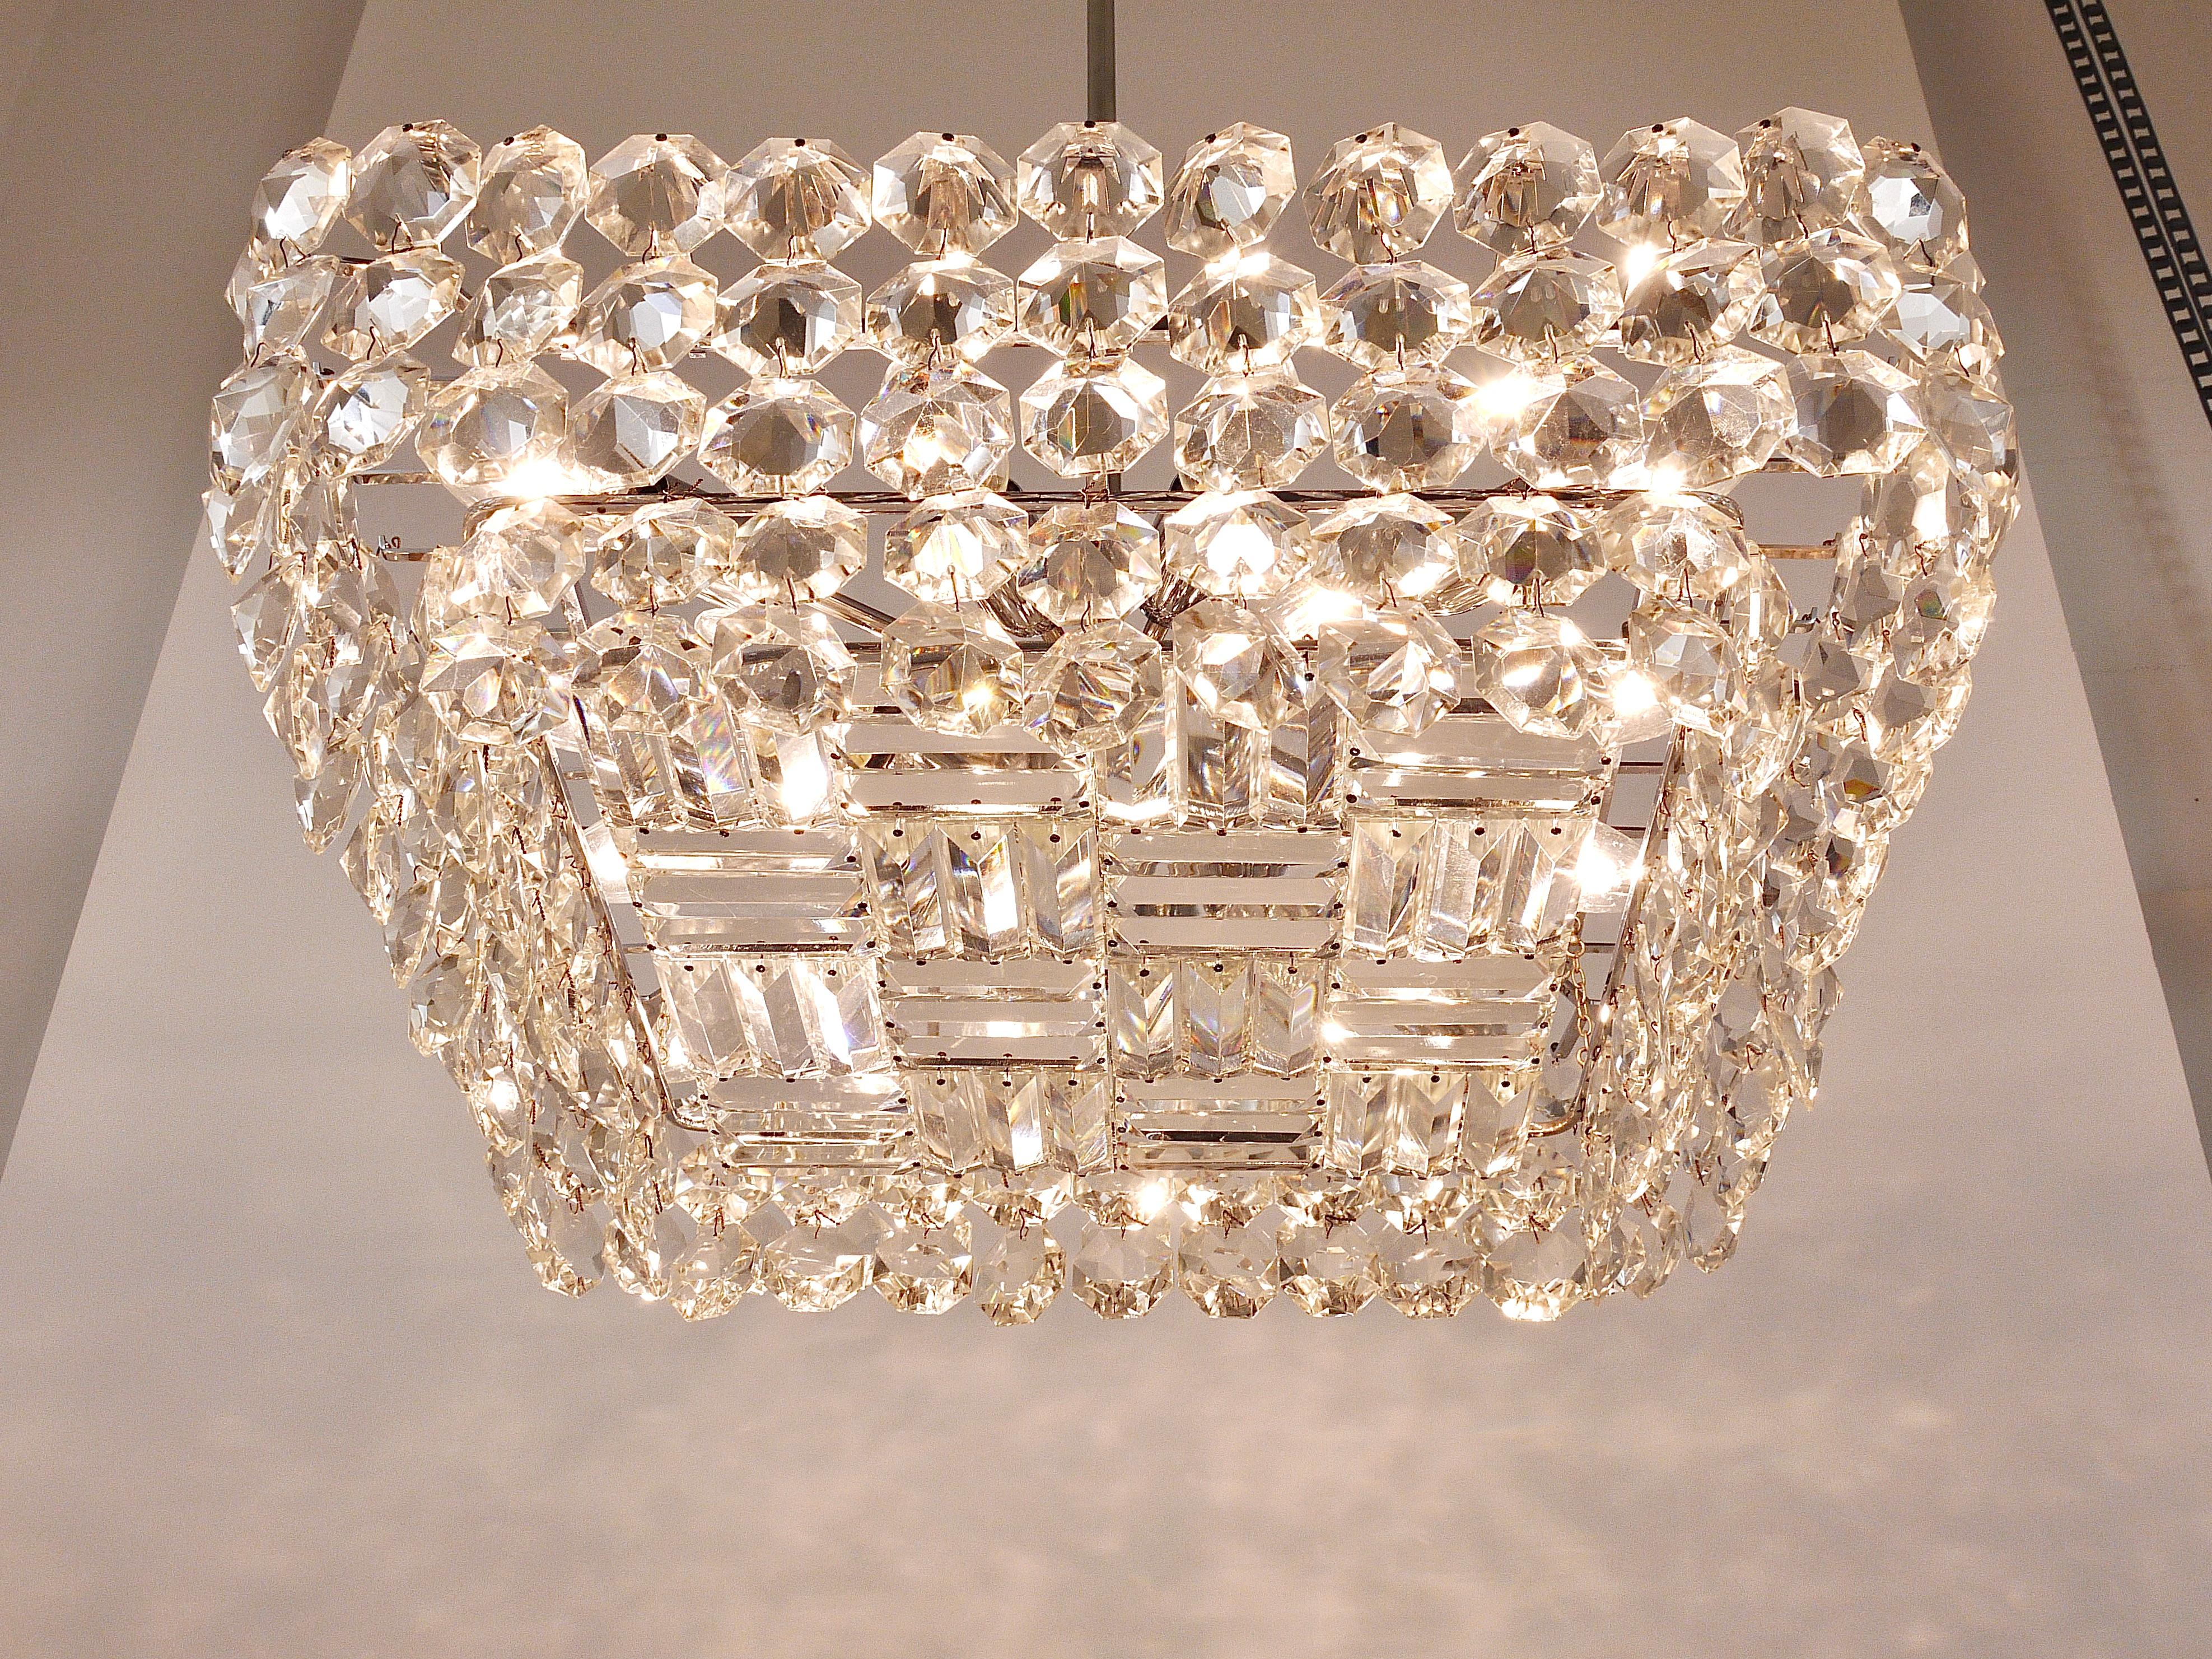 Large Square Bakalowits Chandelier with Diamond-Shaped Crystals, Austria, 1950s For Sale 4